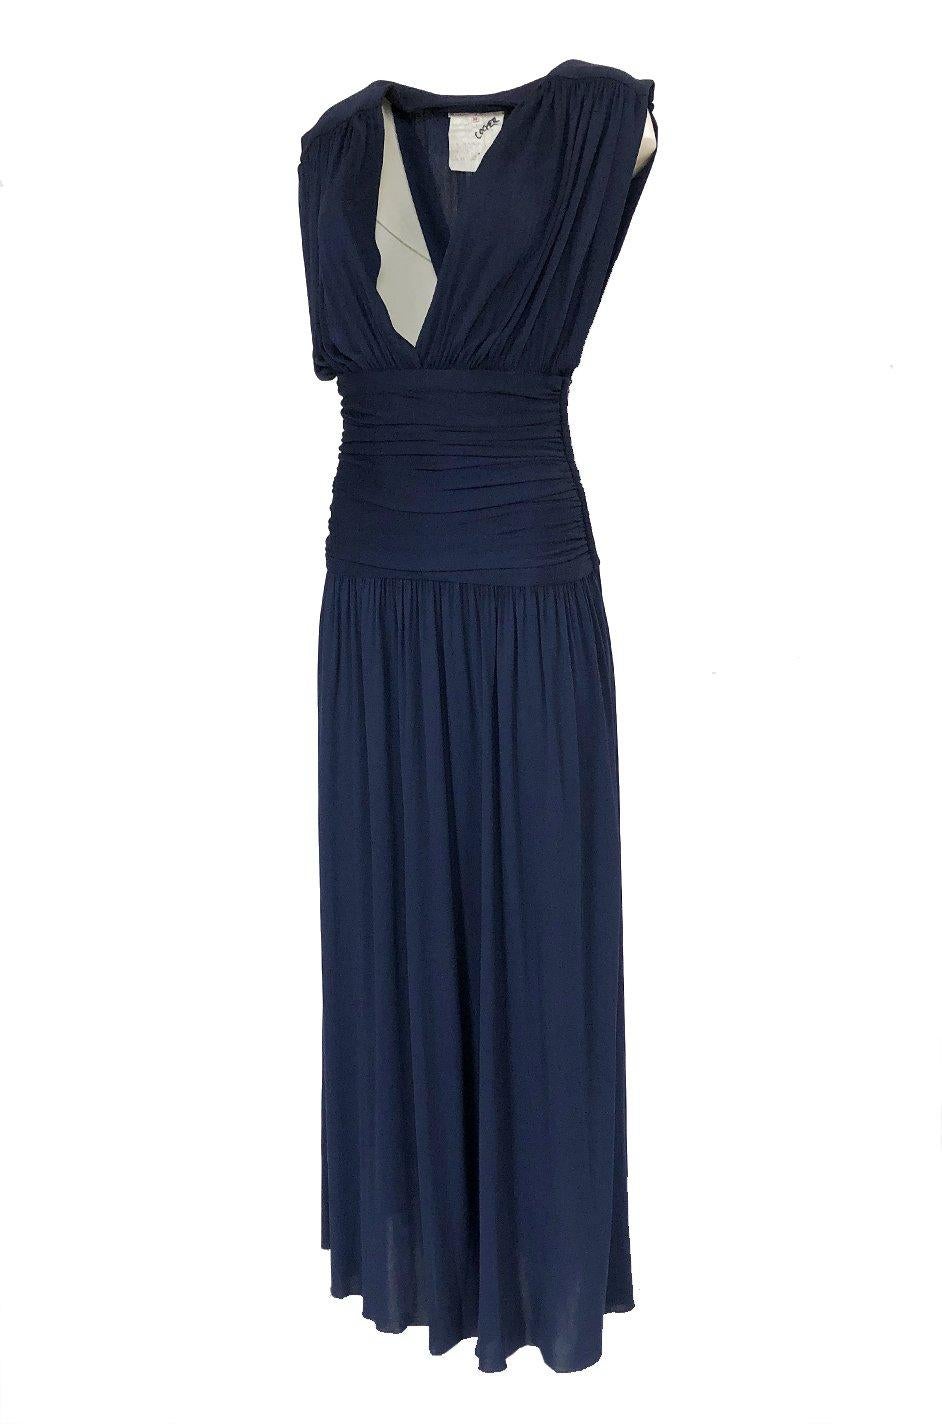 c1991 Yves Saint Laurent Deep Plunge Front Blue Draped Silk Jersey Dress In Excellent Condition In Rockwood, ON